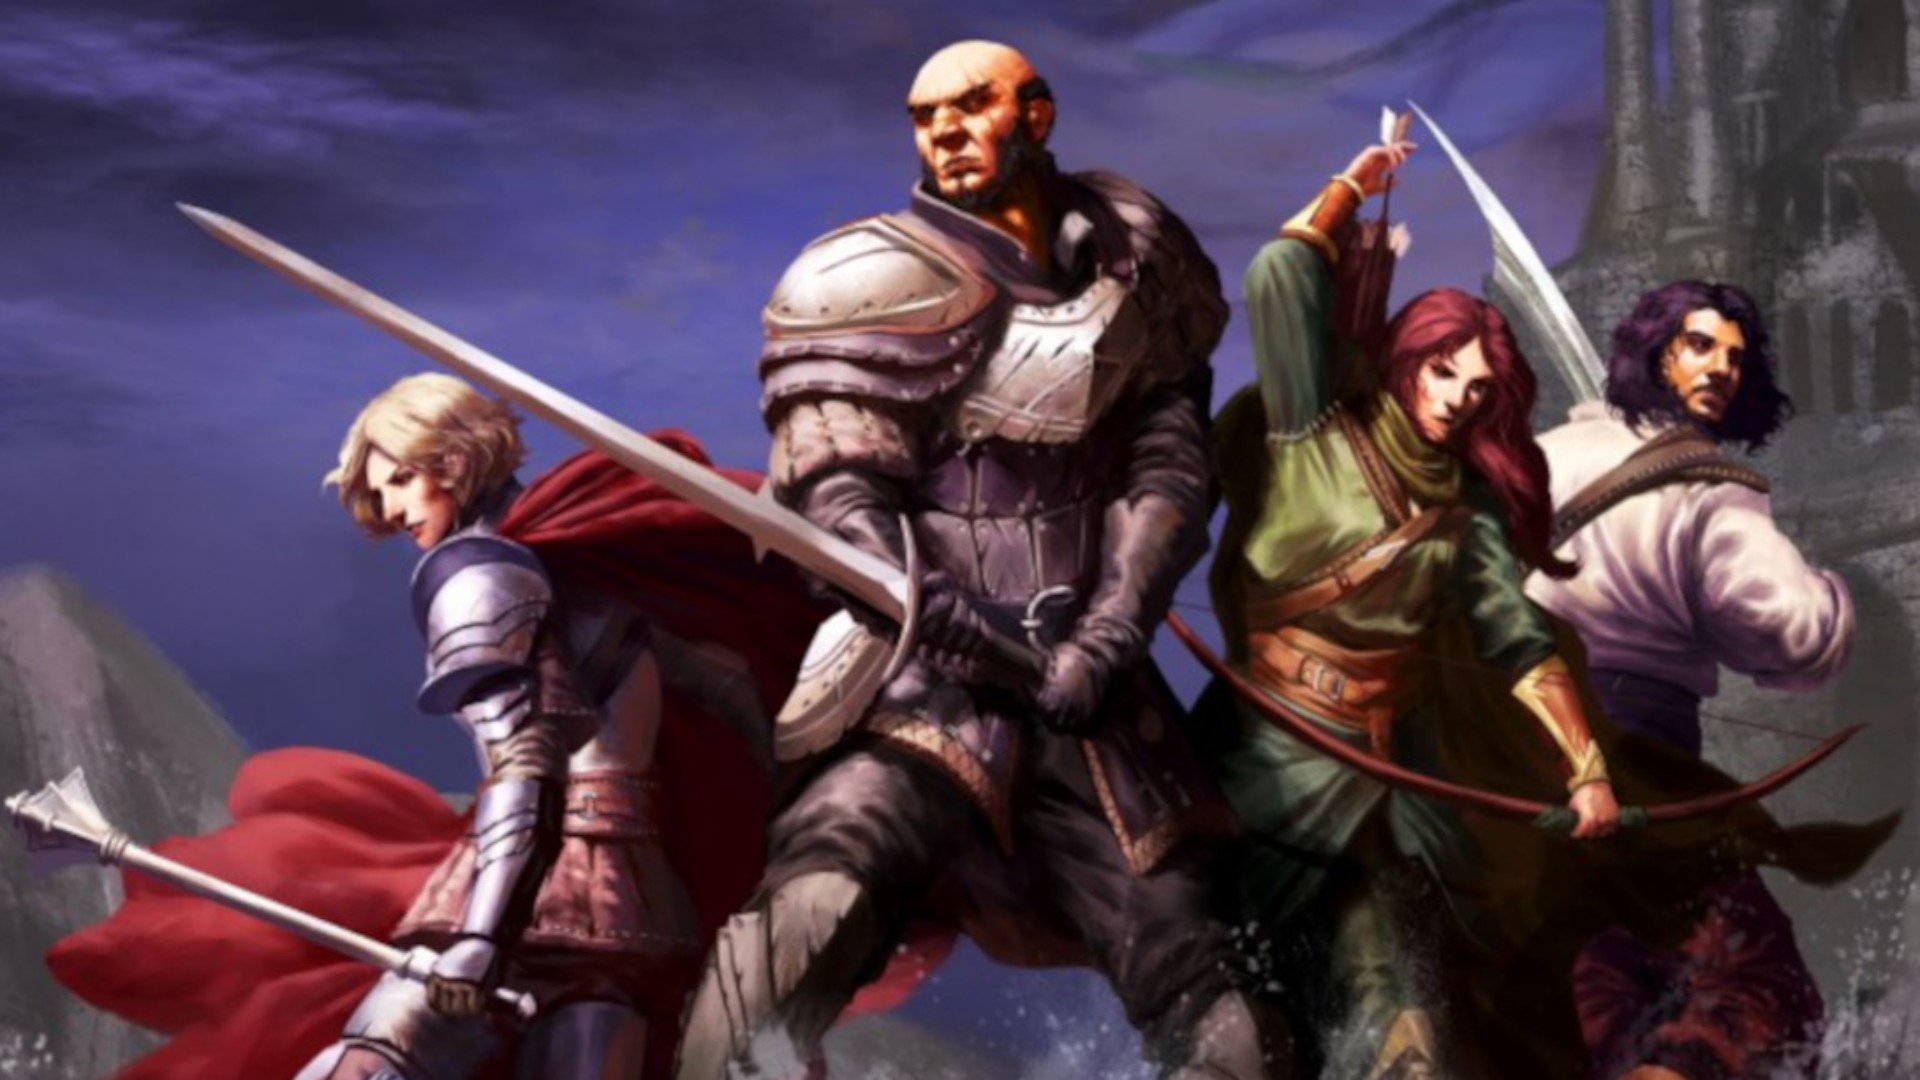 Skald Against the Black Priory review - a modern take on retro RPGs